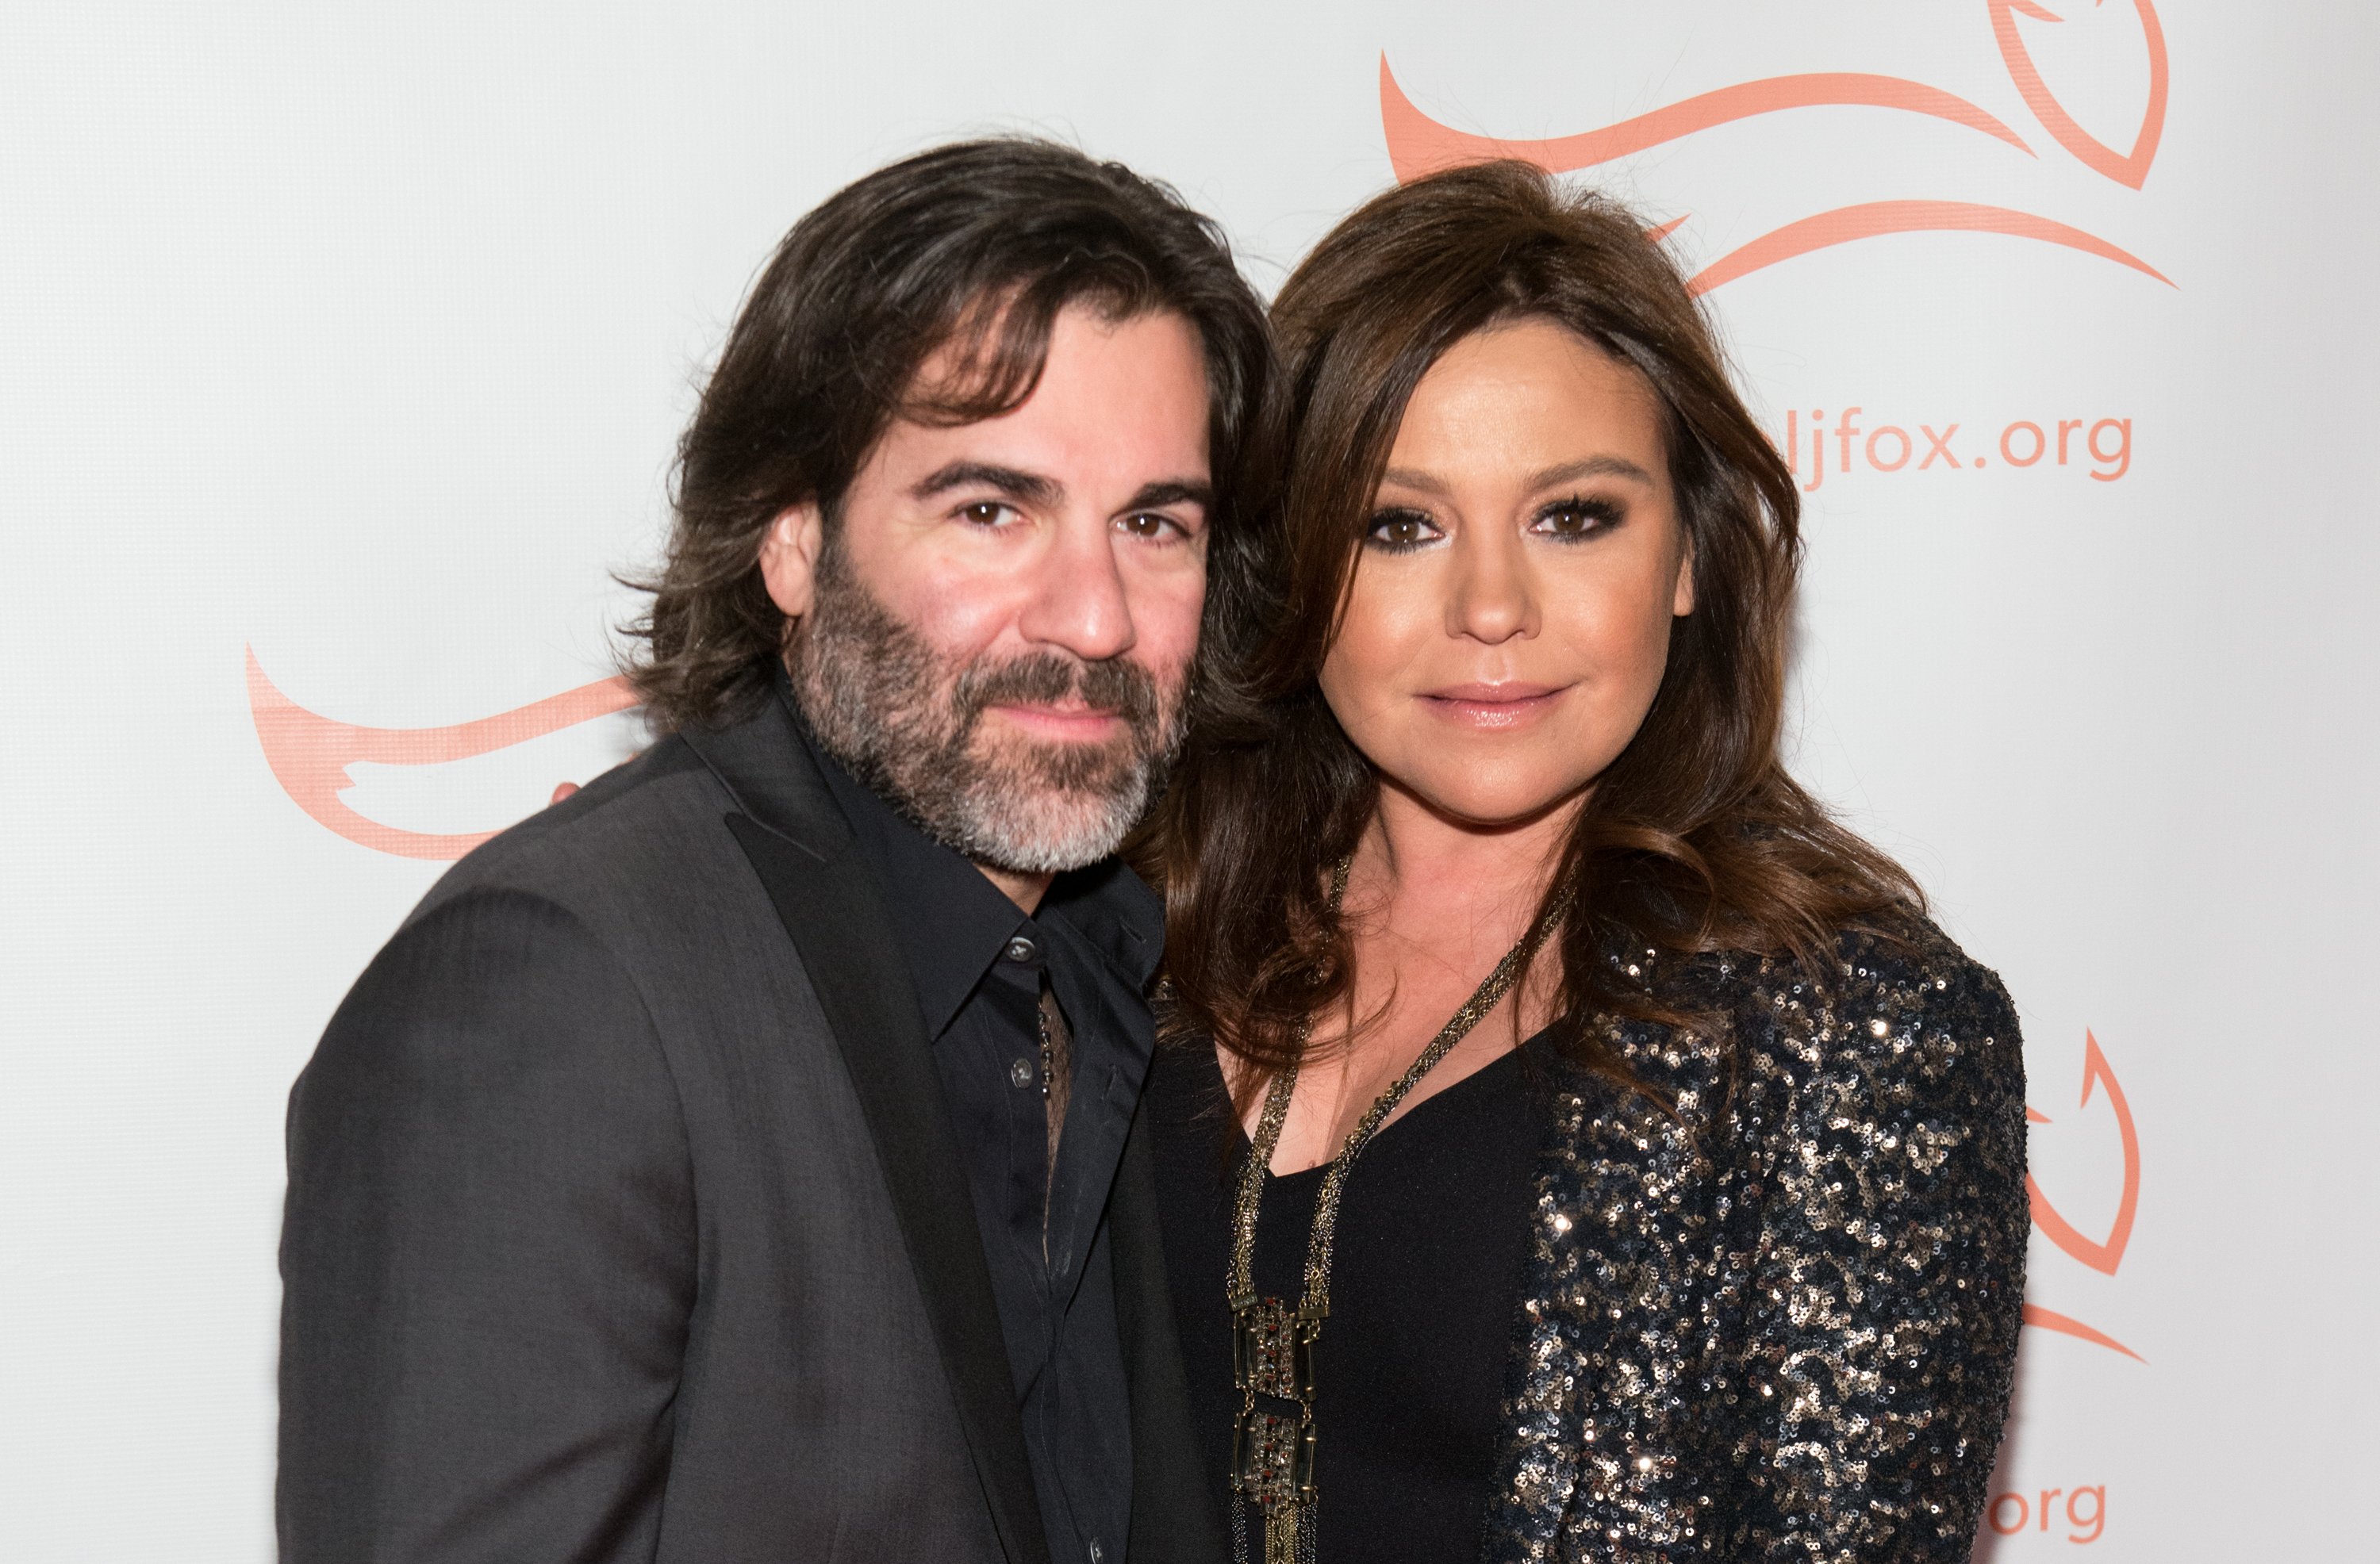 John Cusimano and Rachael Ray at the Michael J. Fox Foundation's "A Funny Thing Happened On The Way To Cure Parkinson's" Gala on November 14, 2015 | Source: Getty Images